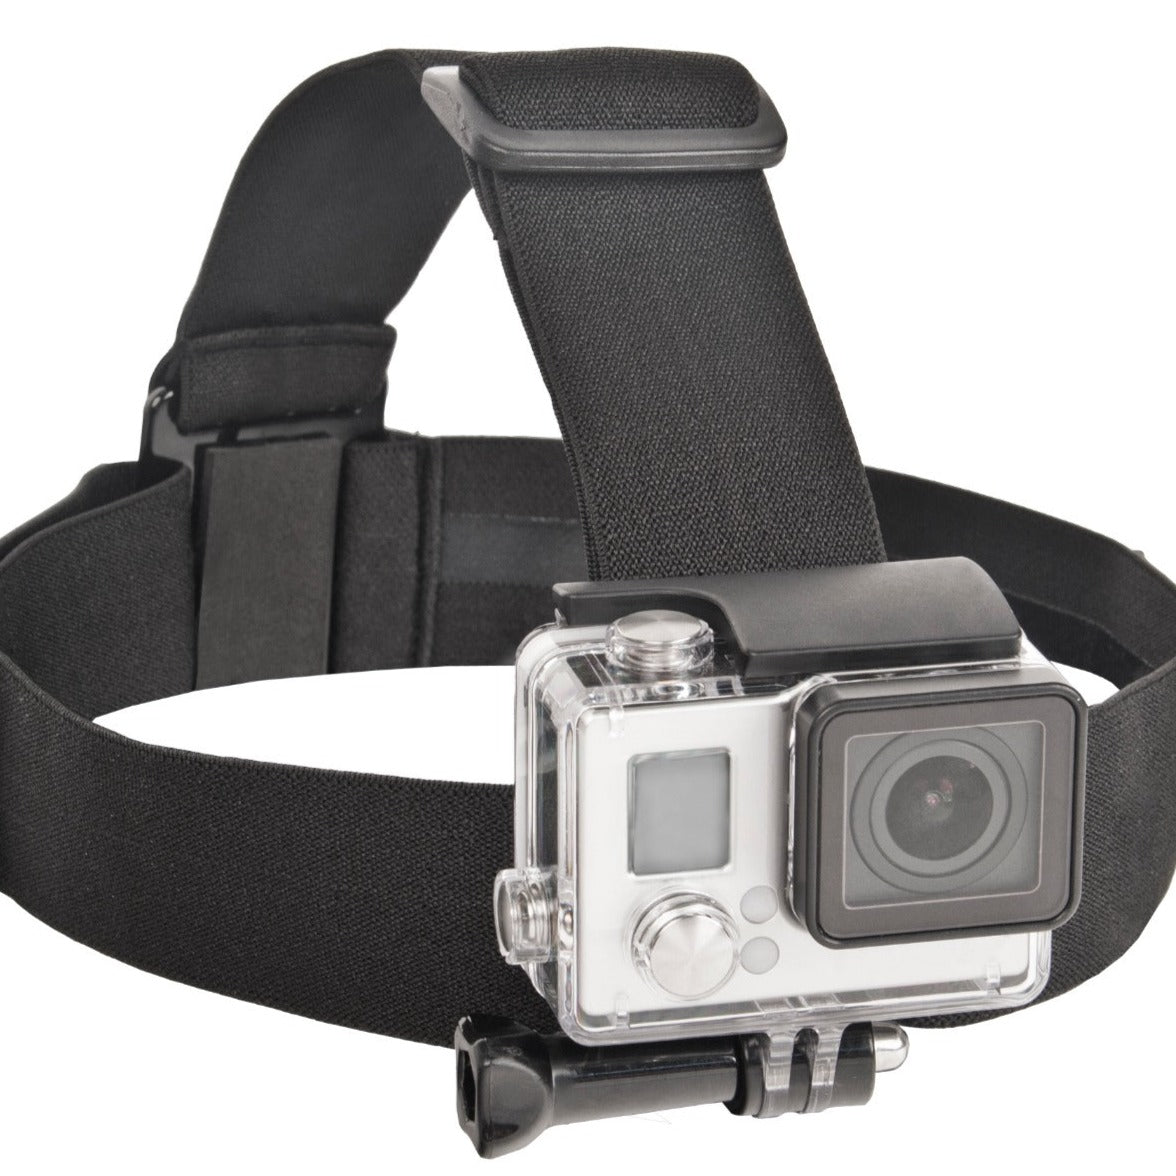 Xtreme Action Series Elastic Head Strap for GoPro 3, 3+, 4, 5, LCD and Session Action Cameras